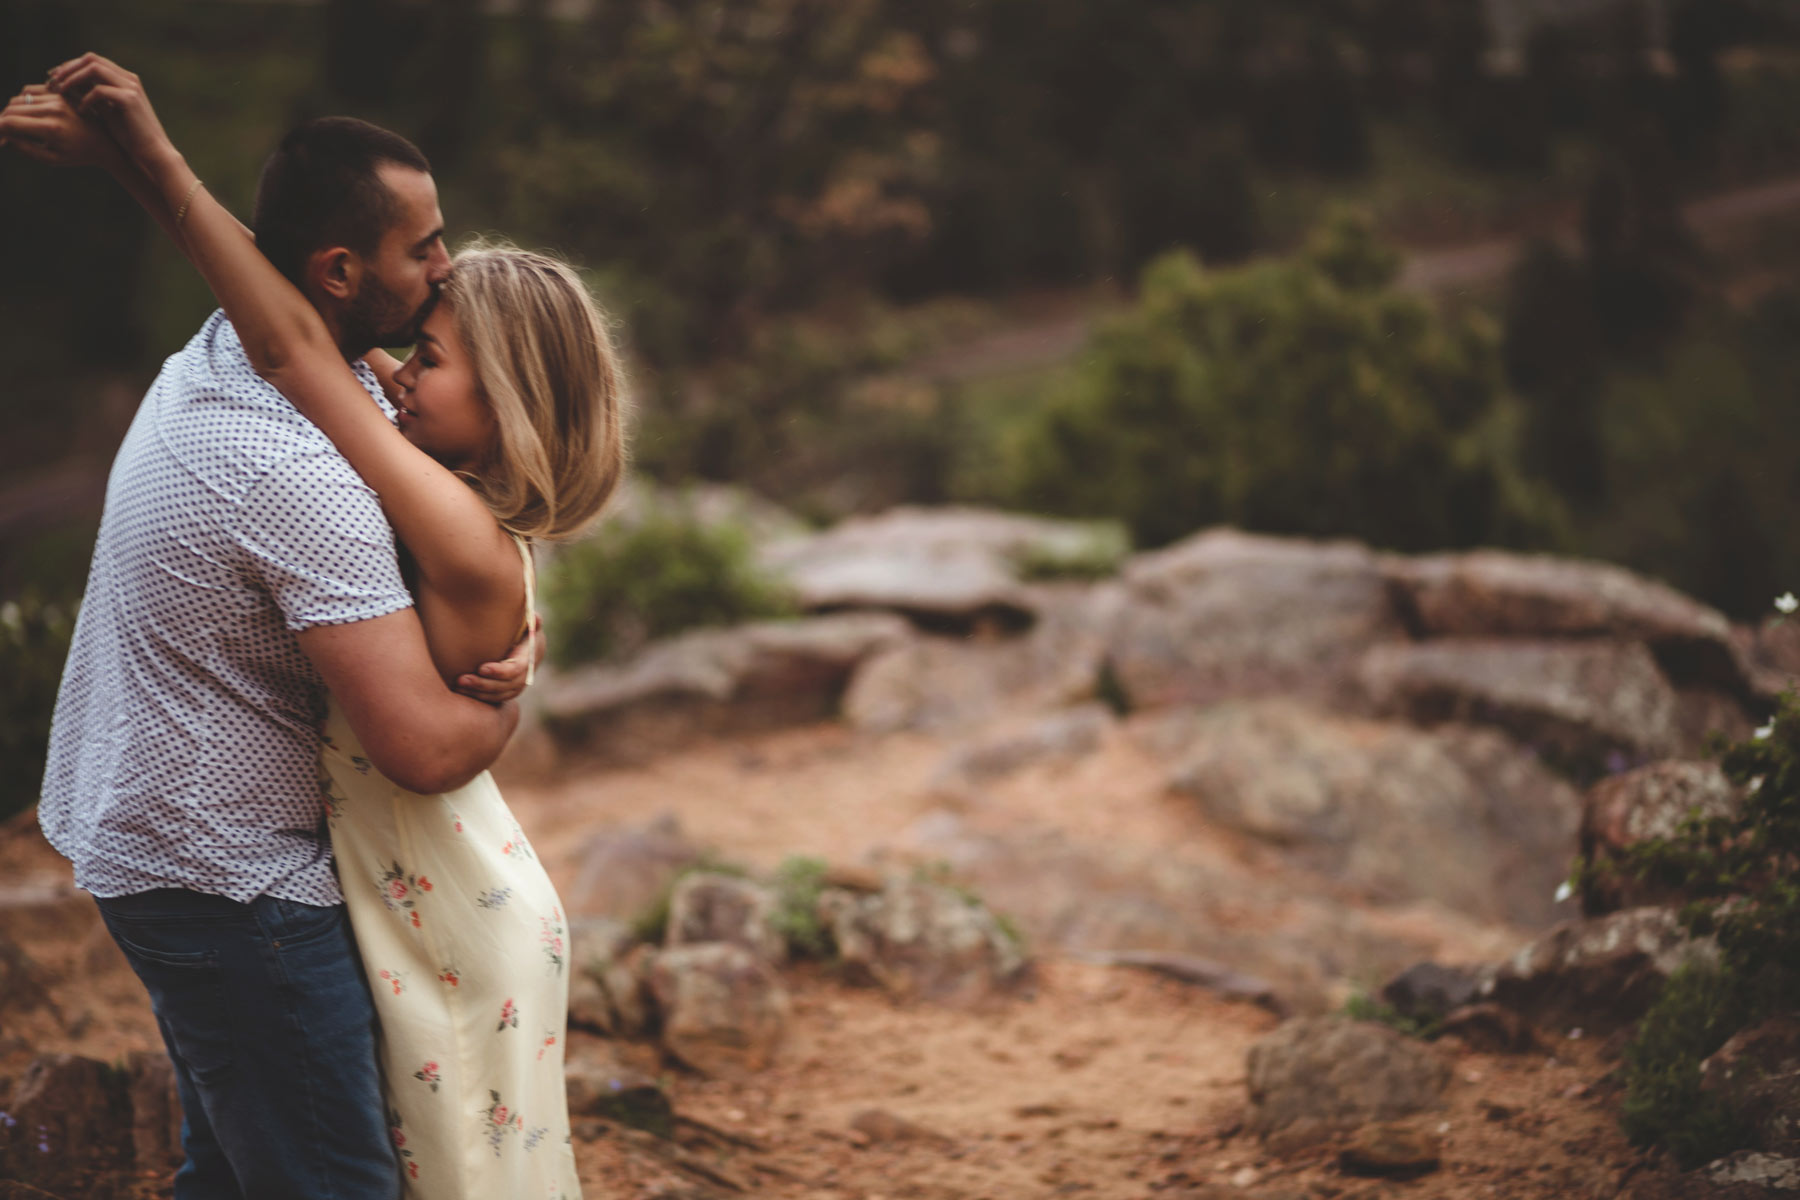 Ellen D Photography. Wedding Professional Photographer in Denver, Colorado. Beautiful bride and groom in a professional photo session , Mountain view engagement session